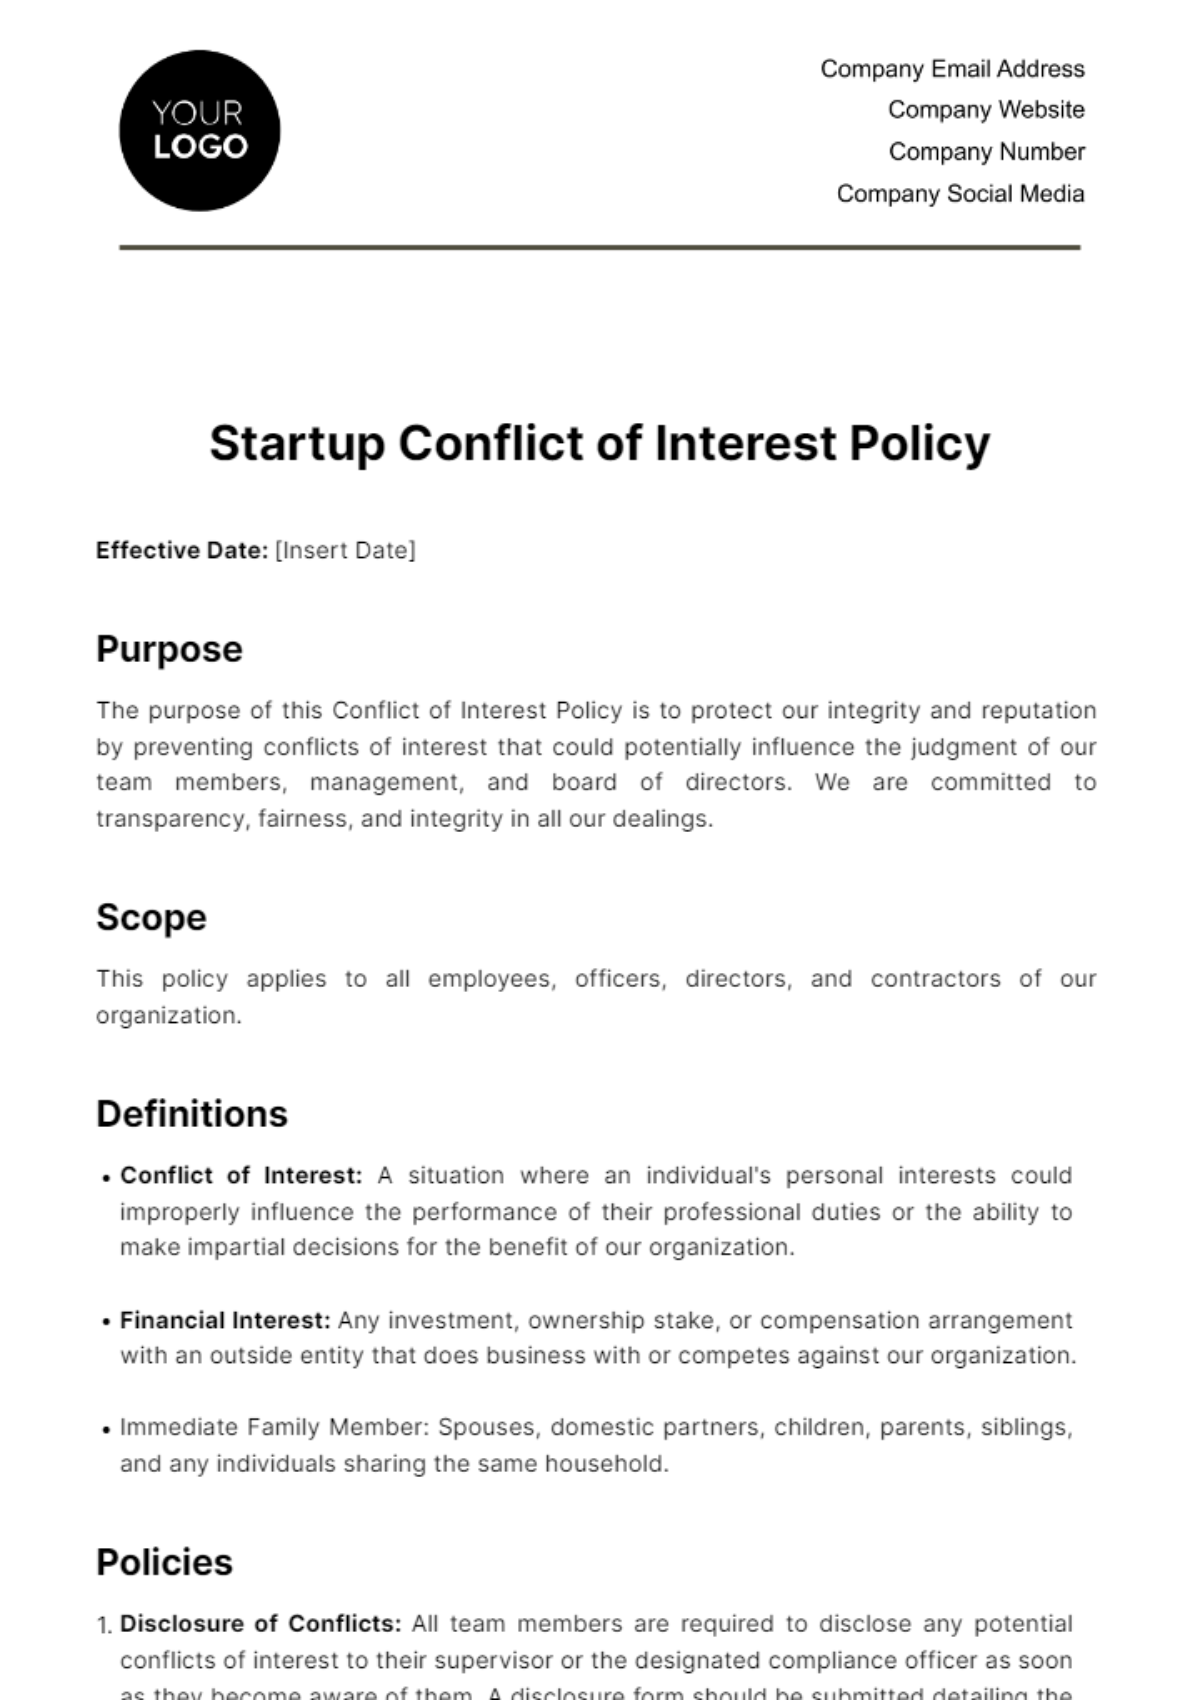 Startup Conflict of Interest Policy Template